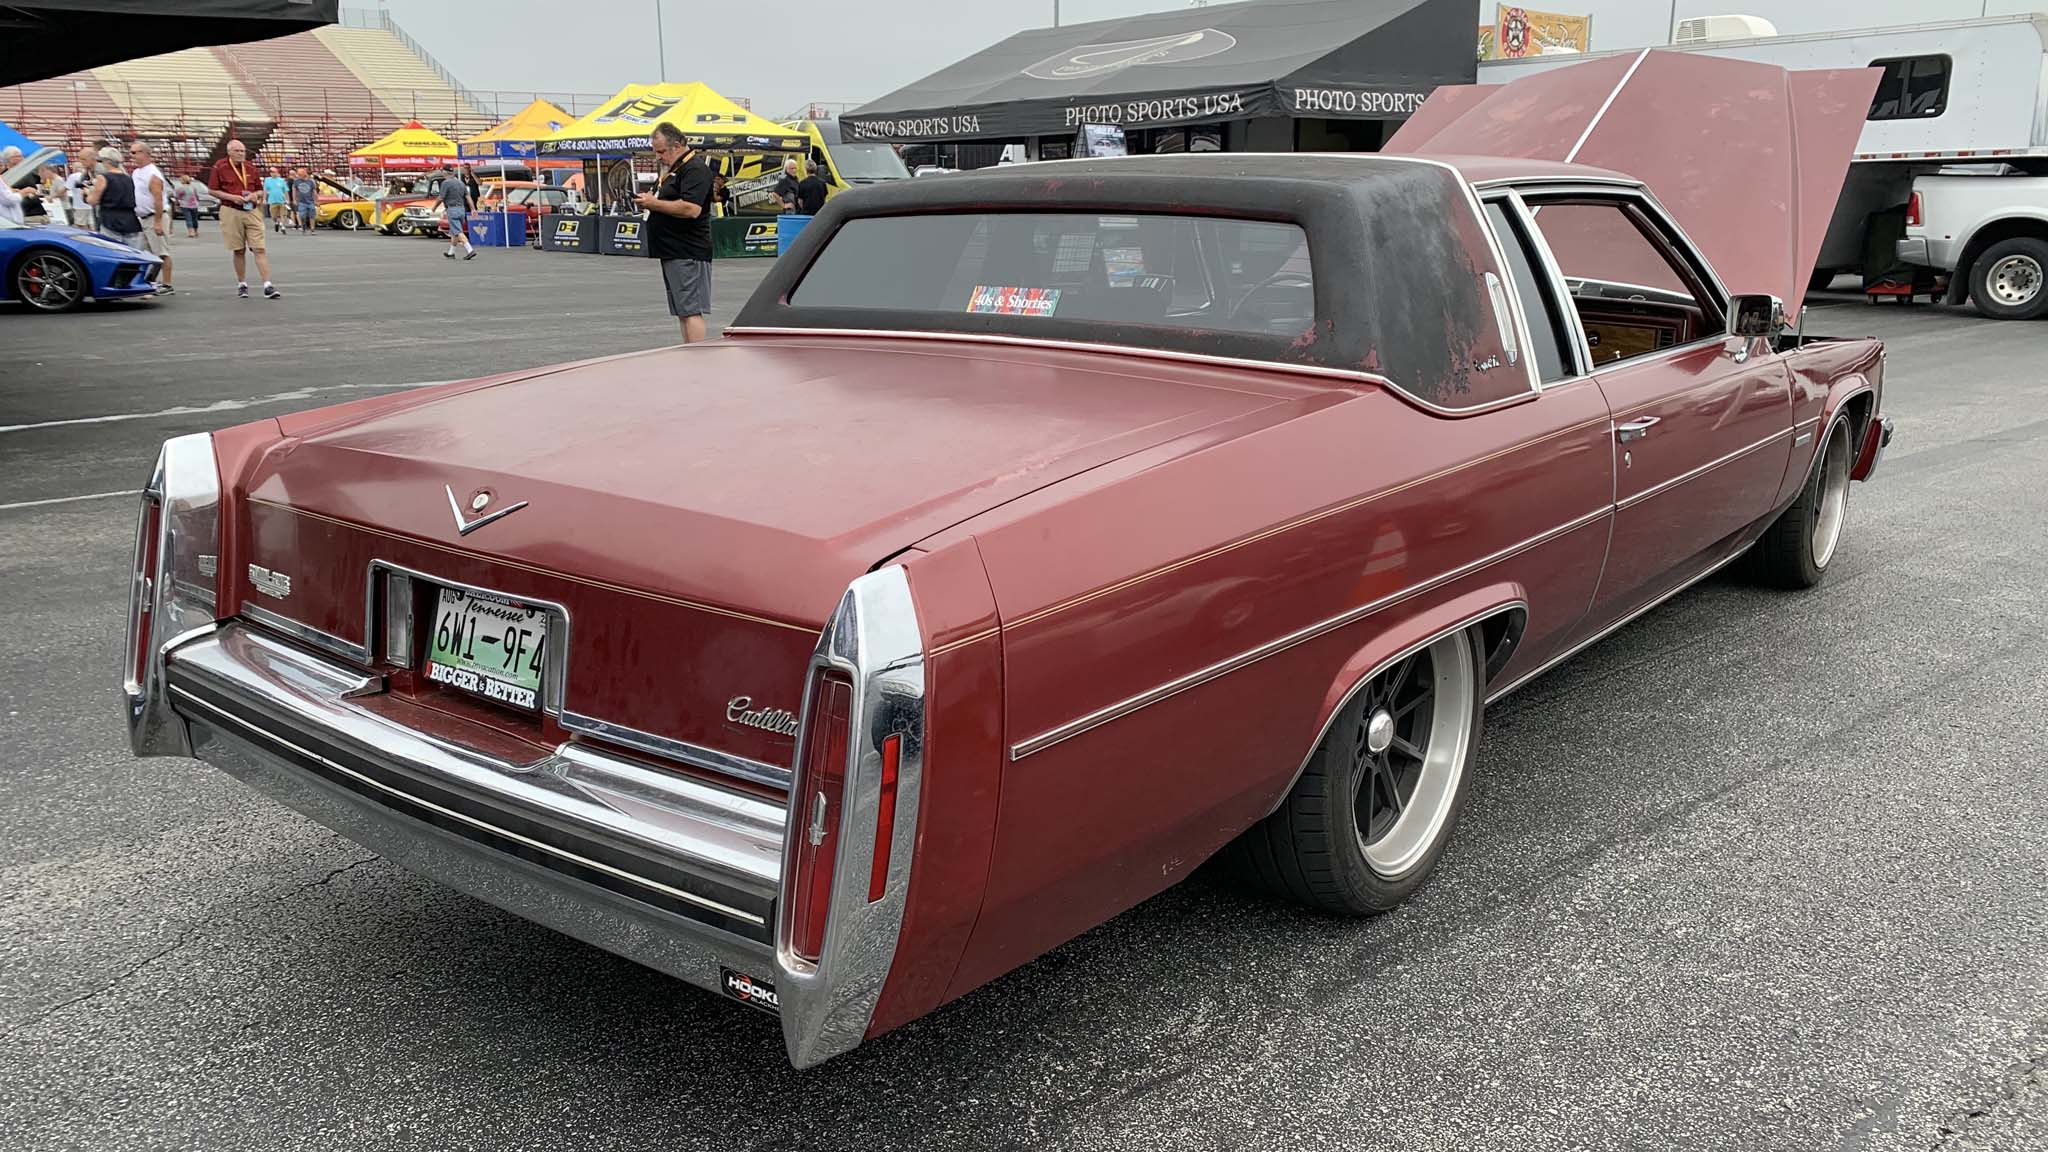 006-1983-cadillac-coupe-deville-caddy-chicken-coupe-american-powertrain-ls-swap-6-speed-manual-tremec-magnum-holley-baer-pro-touring-warhawk-427.jpg